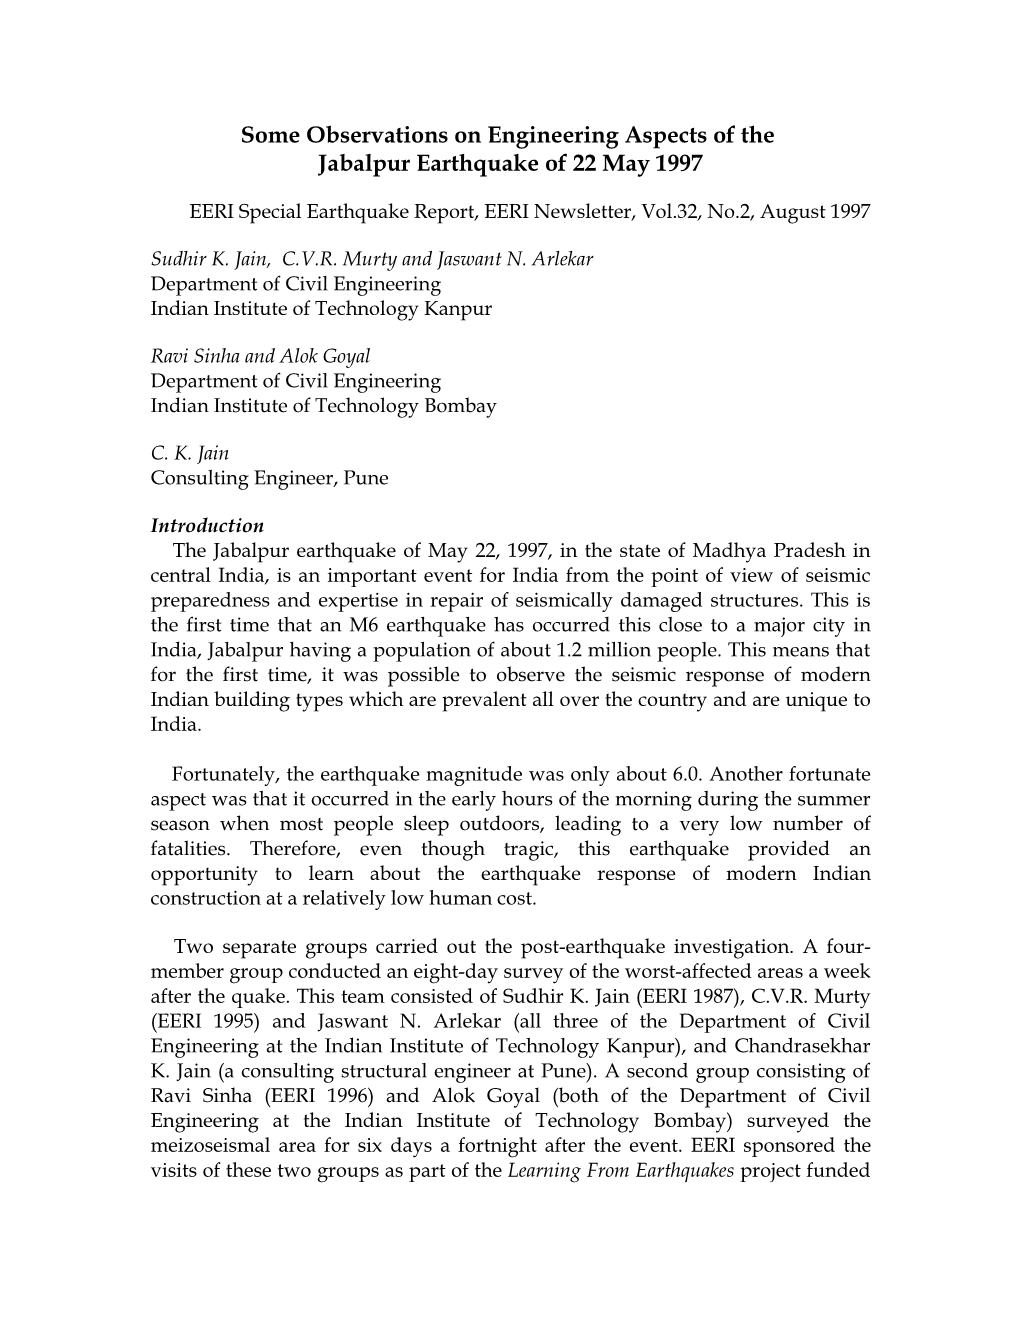 Some Observations on Engineering Aspects of the Jabalpur Earthquake of 22 May 1997